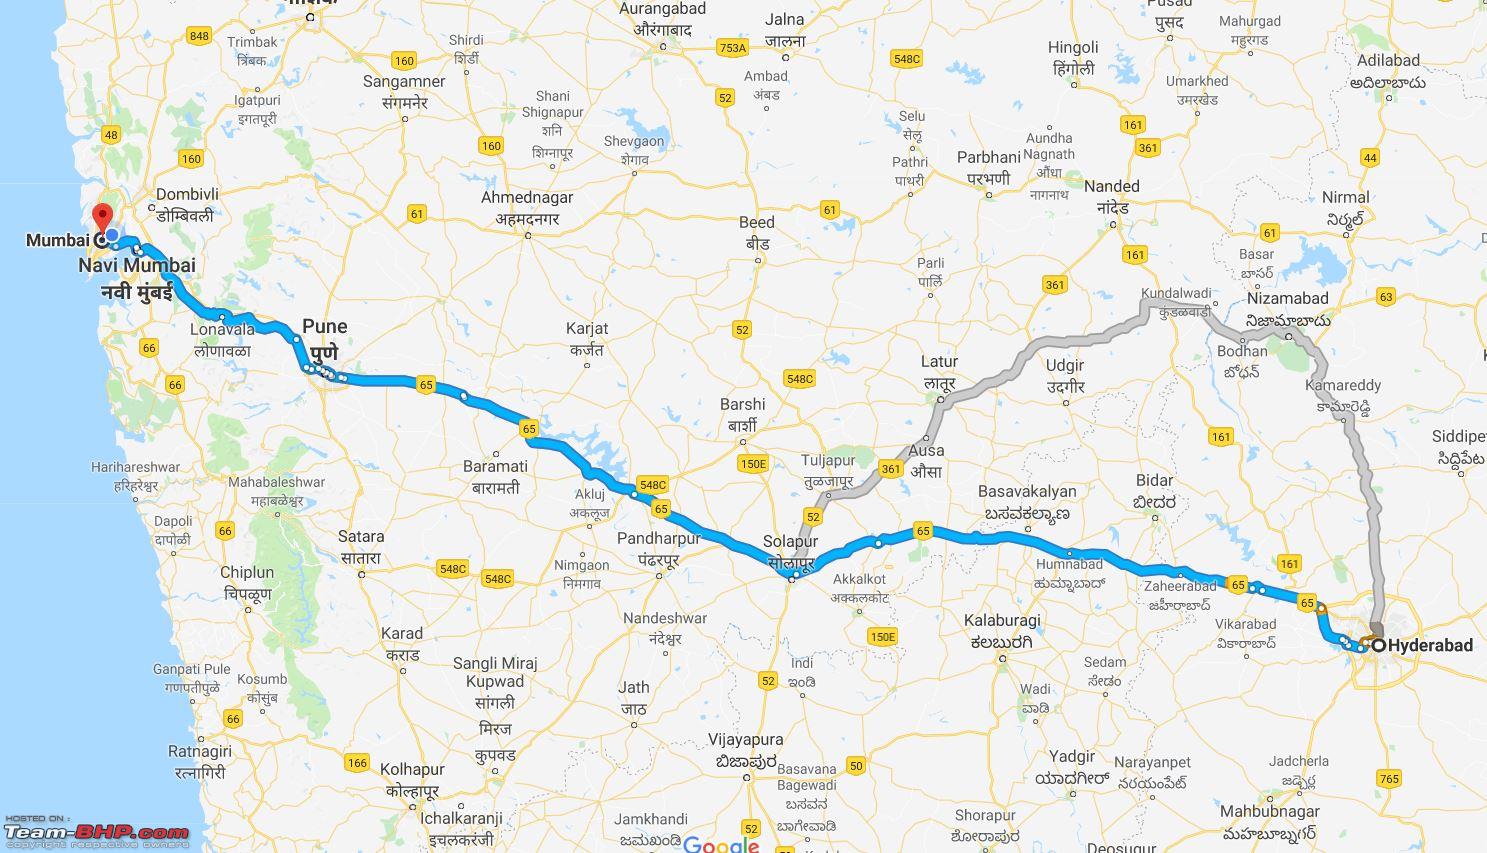 distance between hyderabad and other places in a.p